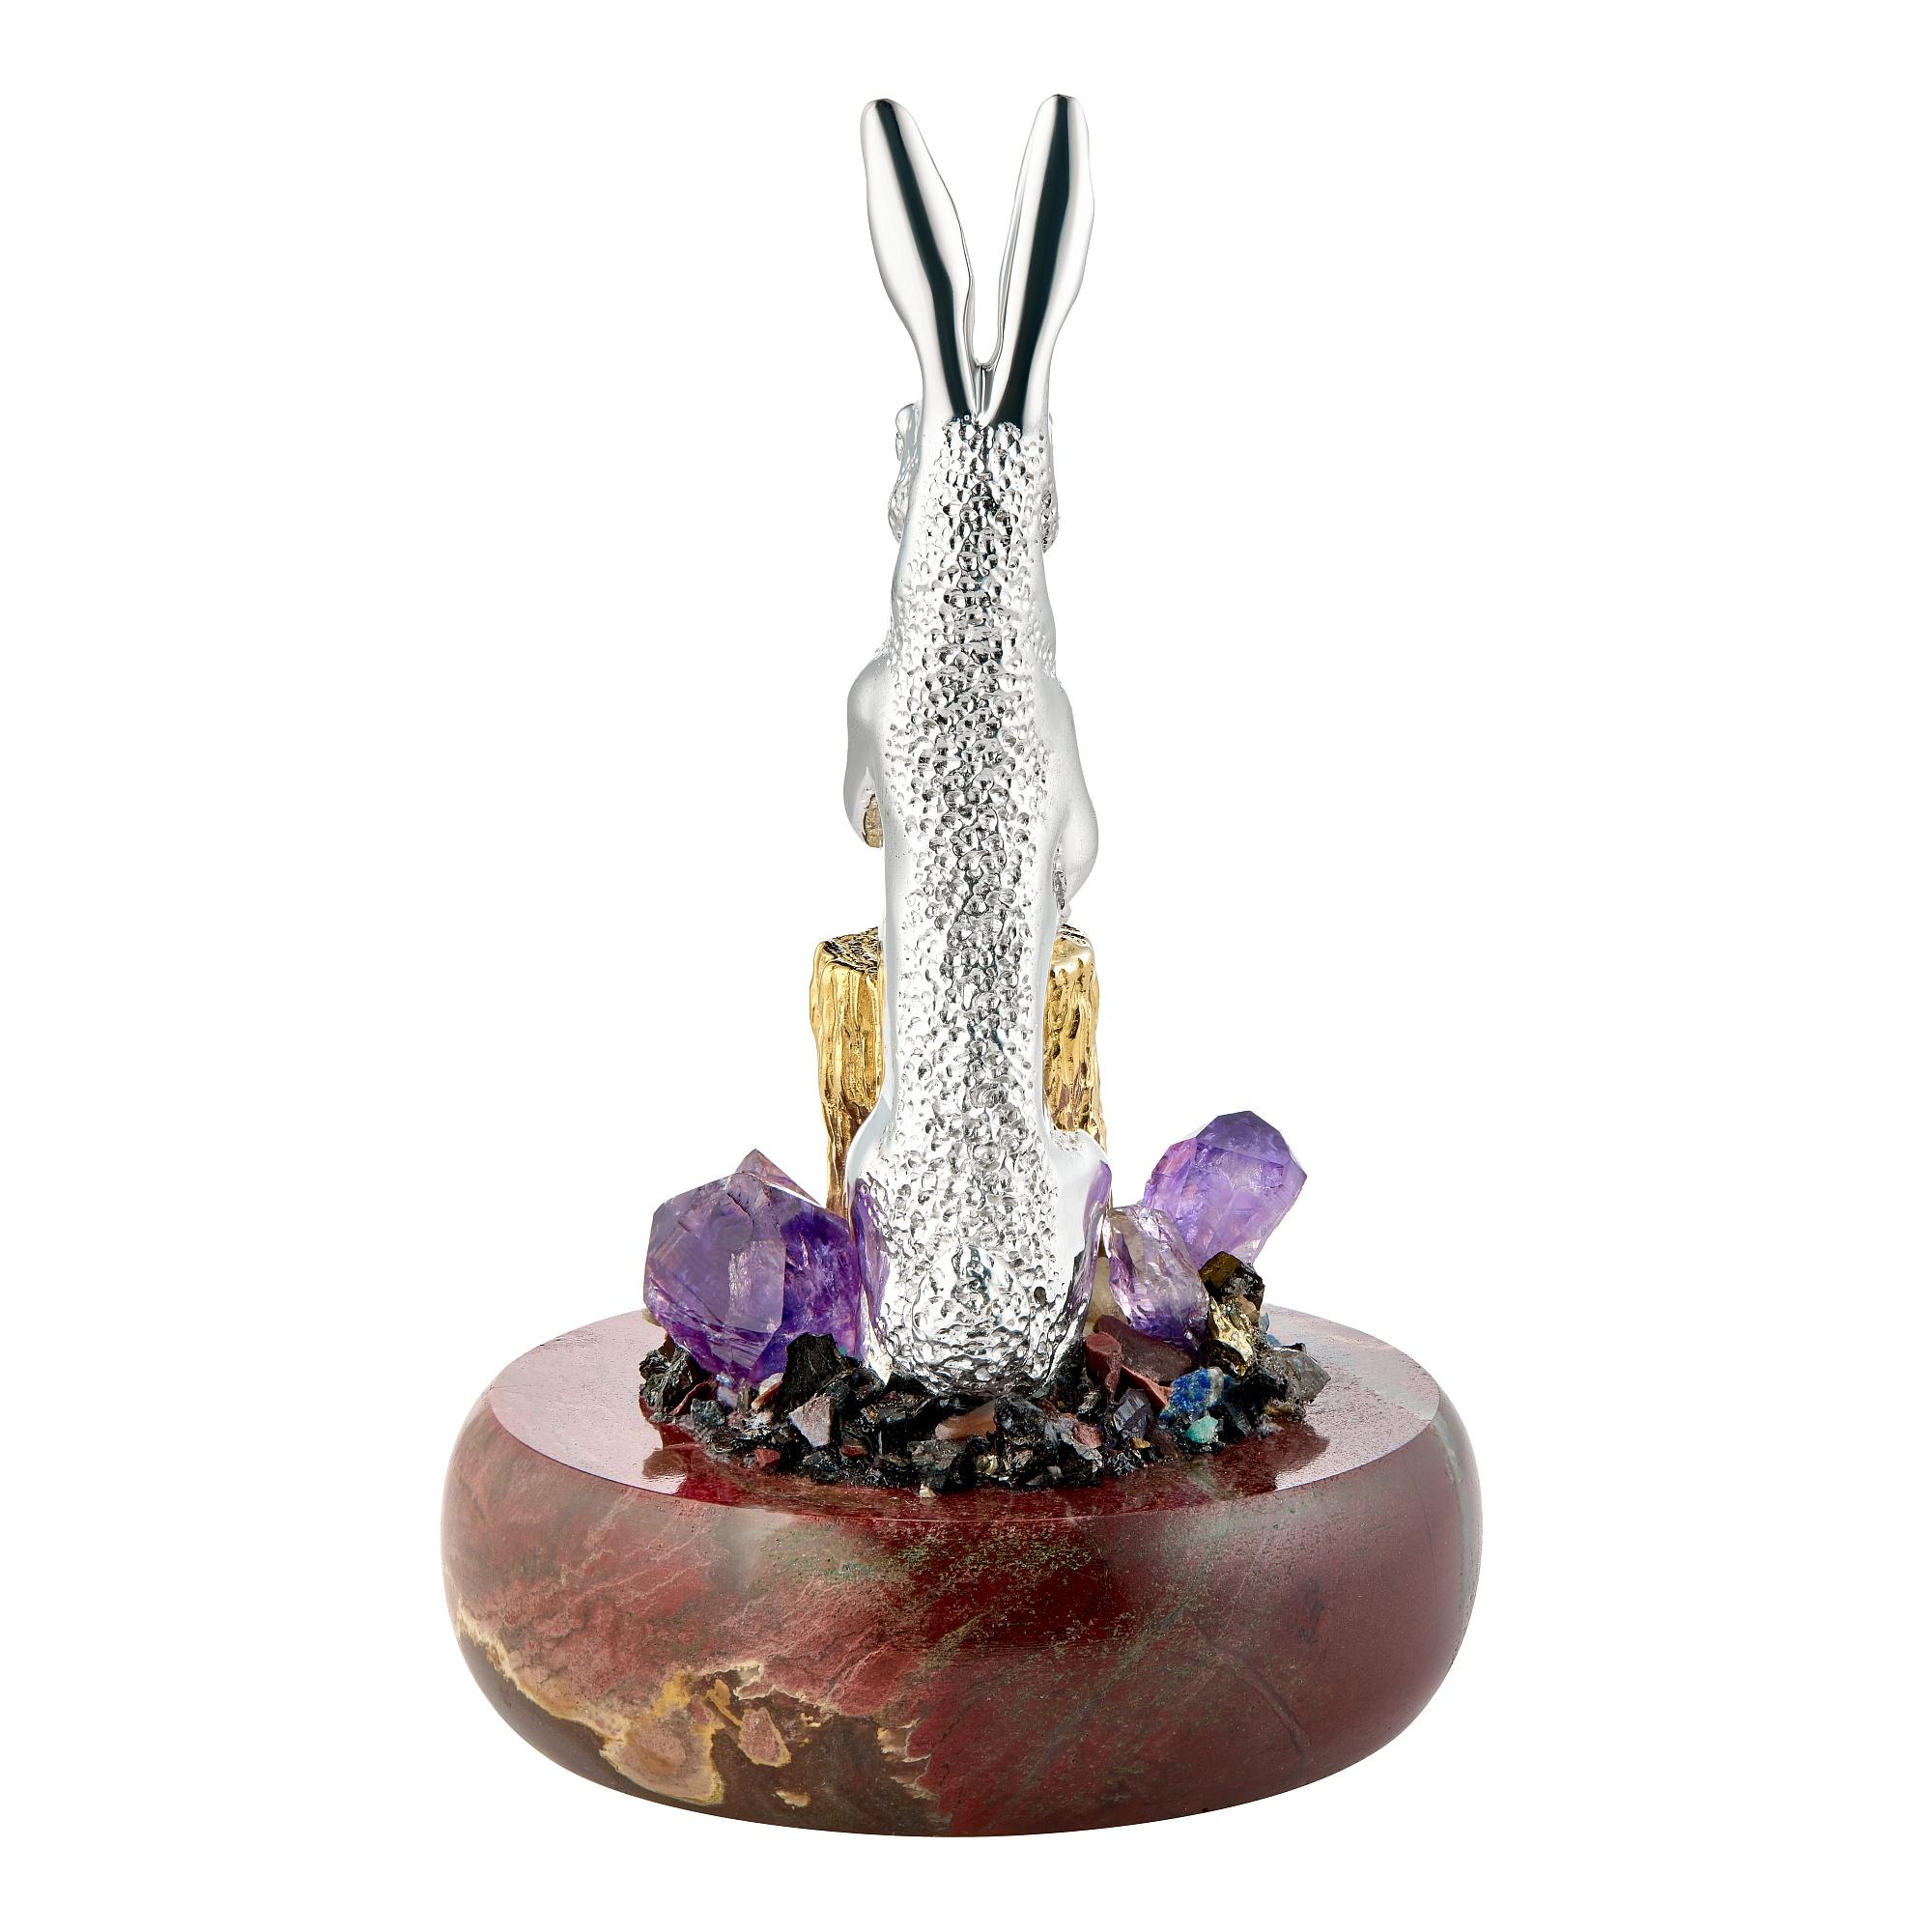 Every rabbit talisman from MOISEIKIN is individual, decorated with various gemstones from the rich Ural mountains, which symbolise happiness, abundance, and talent. A shining silver rabbit drums a stump calling for luck, friends, and happiness. The